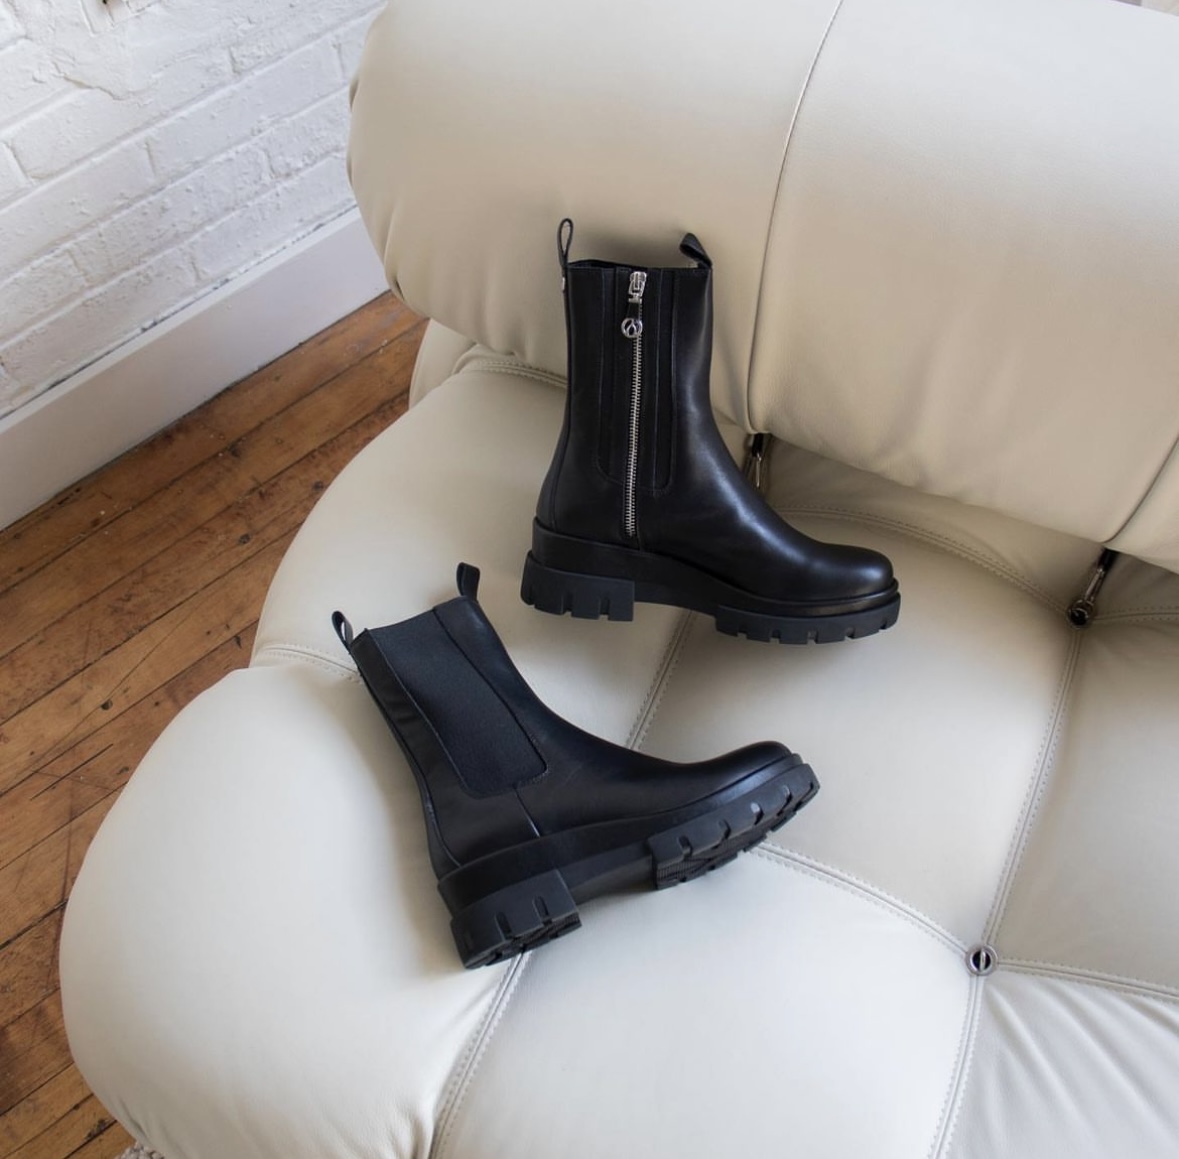 High cut, black leather boots with a zipper from Browns